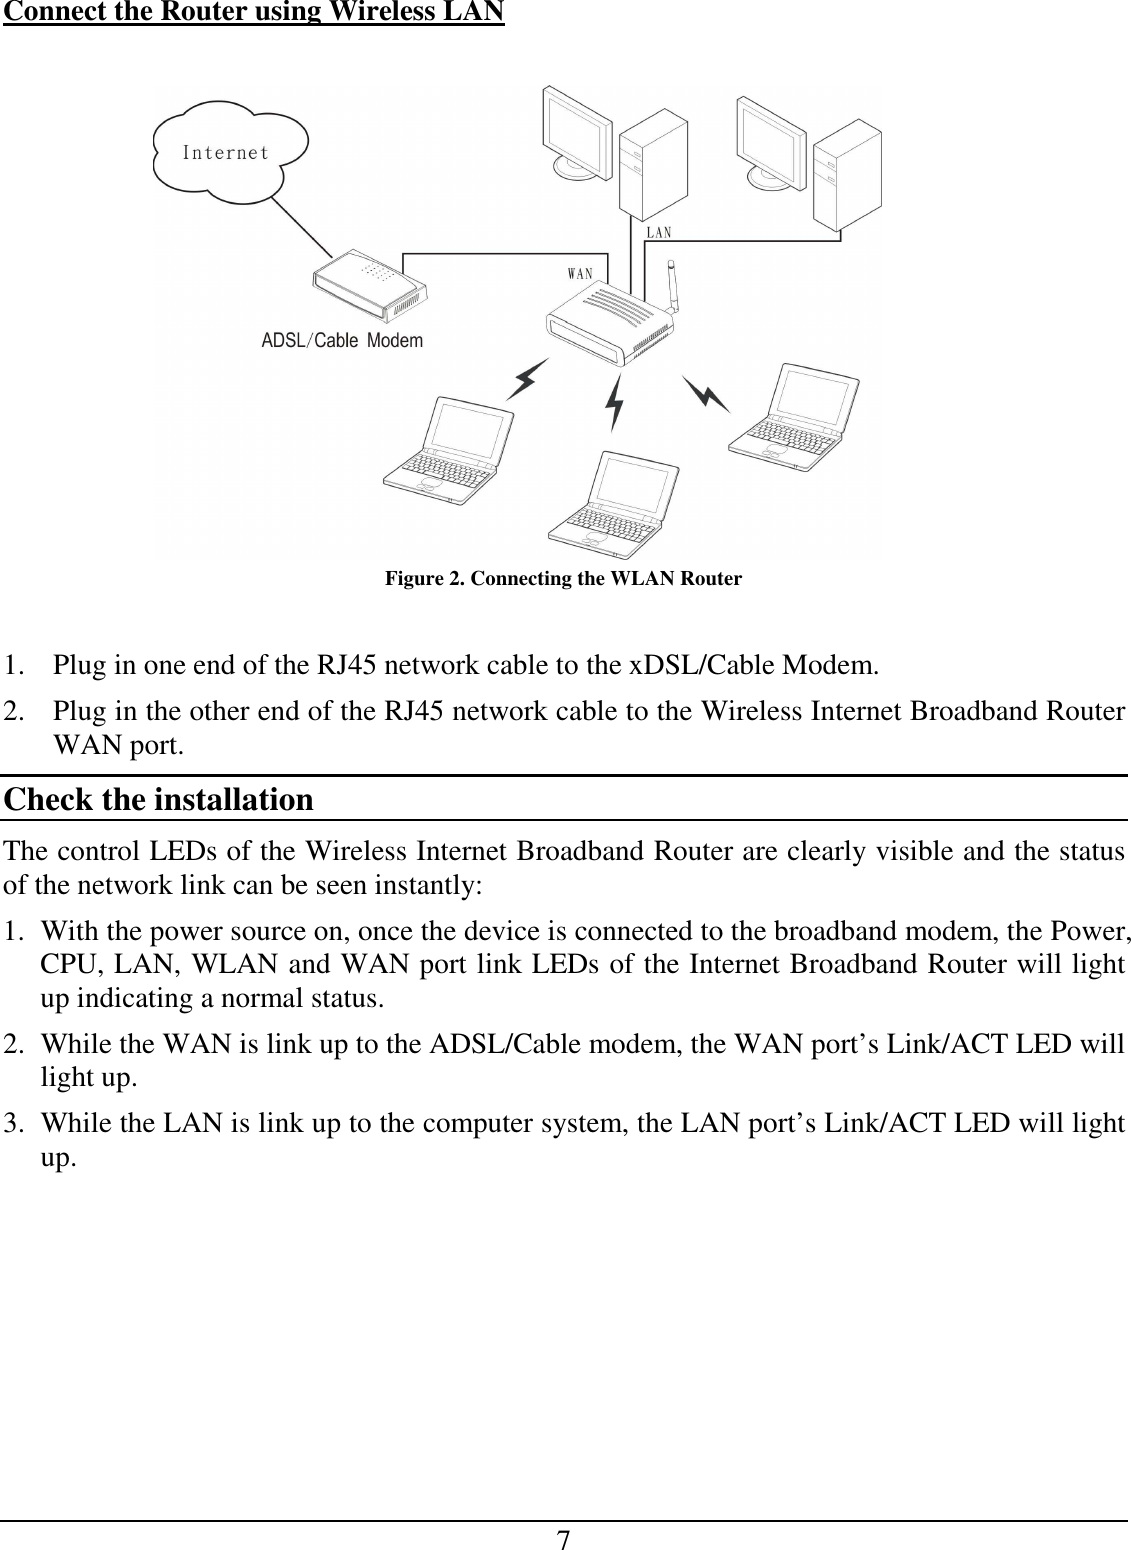 7 Connect the Router using Wireless LAN   Figure 2. Connecting the WLAN Router  1. Plug in one end of the RJ45 network cable to the xDSL/Cable Modem. 2. Plug in the other end of the RJ45 network cable to the Wireless Internet Broadband Router WAN port. Check the installation The control LEDs of the Wireless Internet Broadband Router are clearly visible and the status of the network link can be seen instantly: 1. With the power source on, once the device is connected to the broadband modem, the Power, CPU, LAN, WLAN and WAN port link LEDs of the Internet Broadband Router will light up indicating a normal status. 2. While the WAN is link up to the ADSL/Cable modem, the WAN port’s Link/ACT LED will light up. 3. While the LAN is link up to the computer system, the LAN port’s Link/ACT LED will light up.  